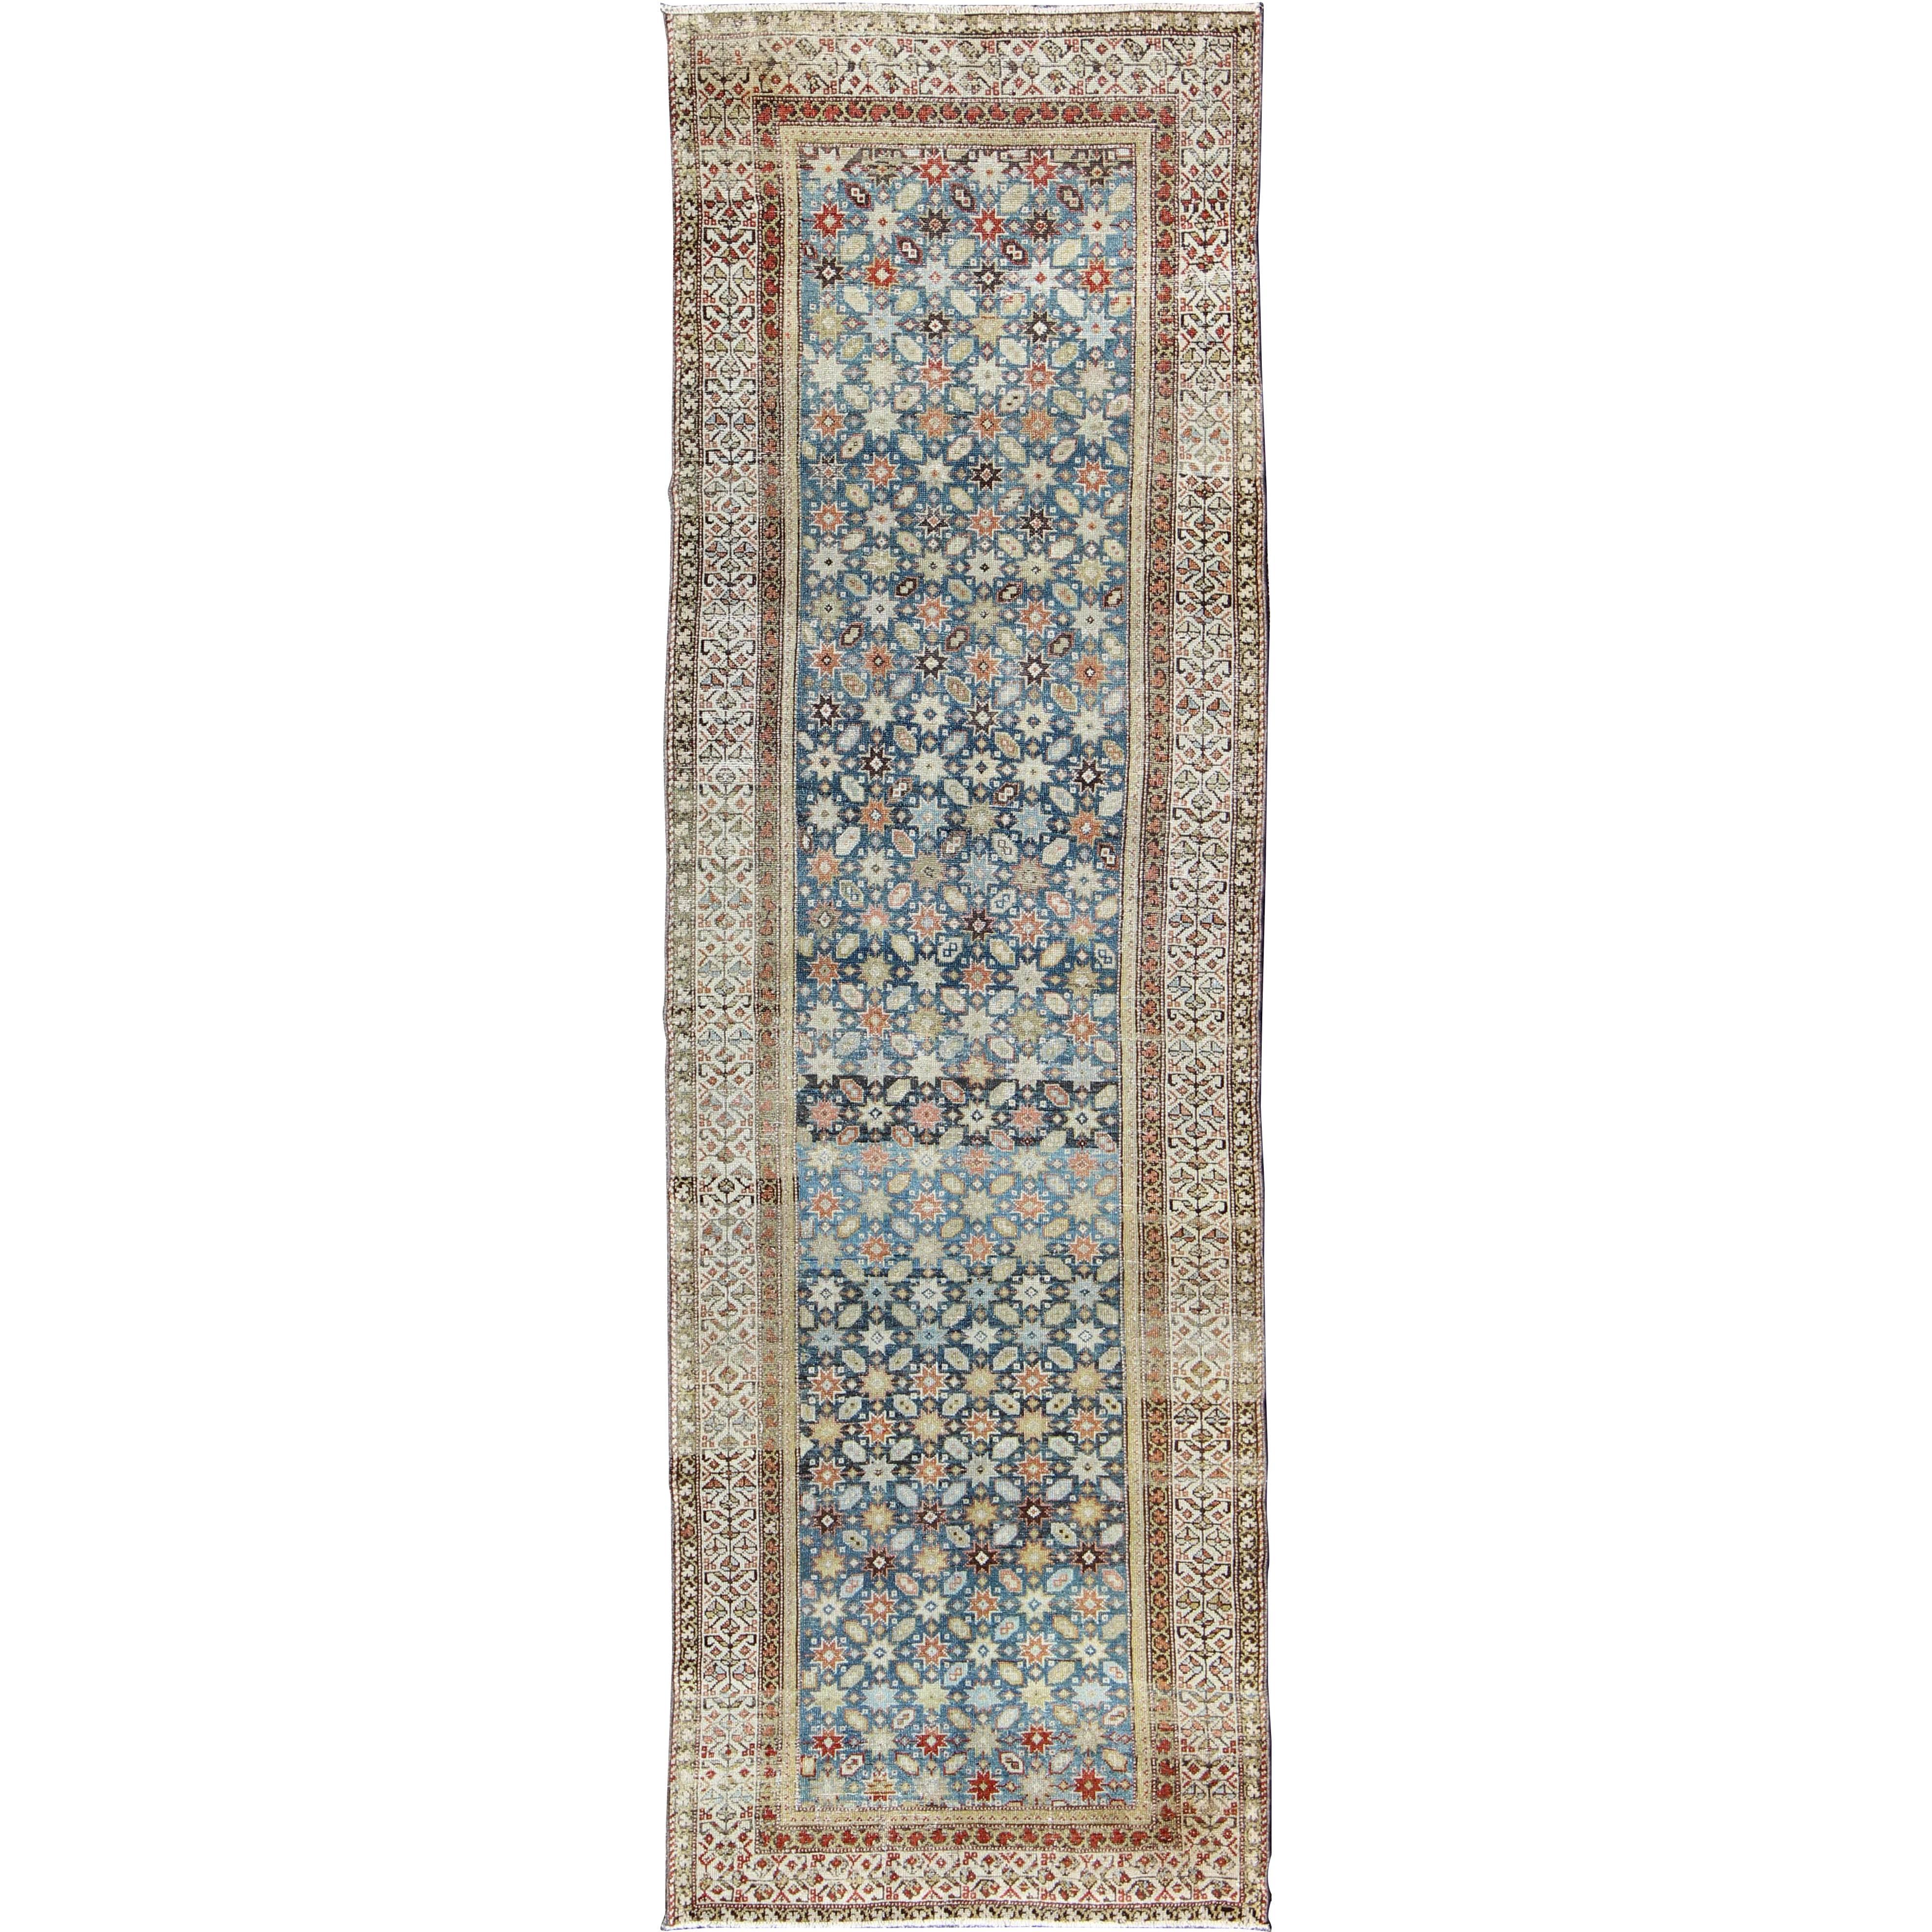 Colorful Antique Persian Malayer Runner with Blue Background, Floral Motifs